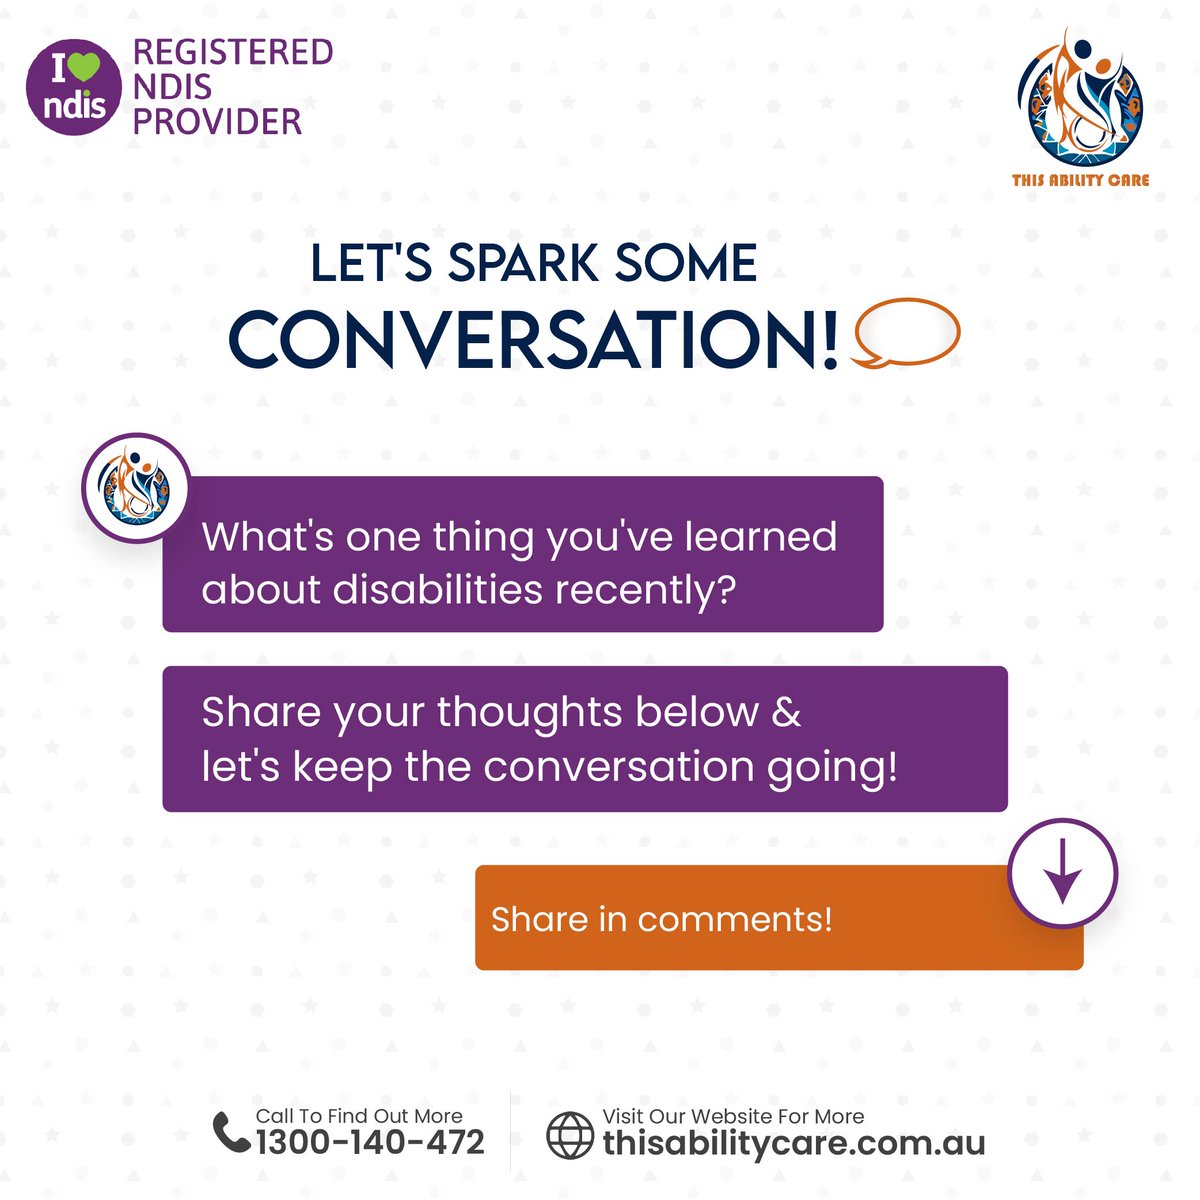 Join the discussion! 💬  We want to hear from you: What's your perspective on disabilities? Share your thoughts below and let's learn from each other.  
.
.
.
#DisabilityAwareness #DisabilityCampaign #BreakingDownBarriers #ndis #ndisprovider #disability #disabilityawareness